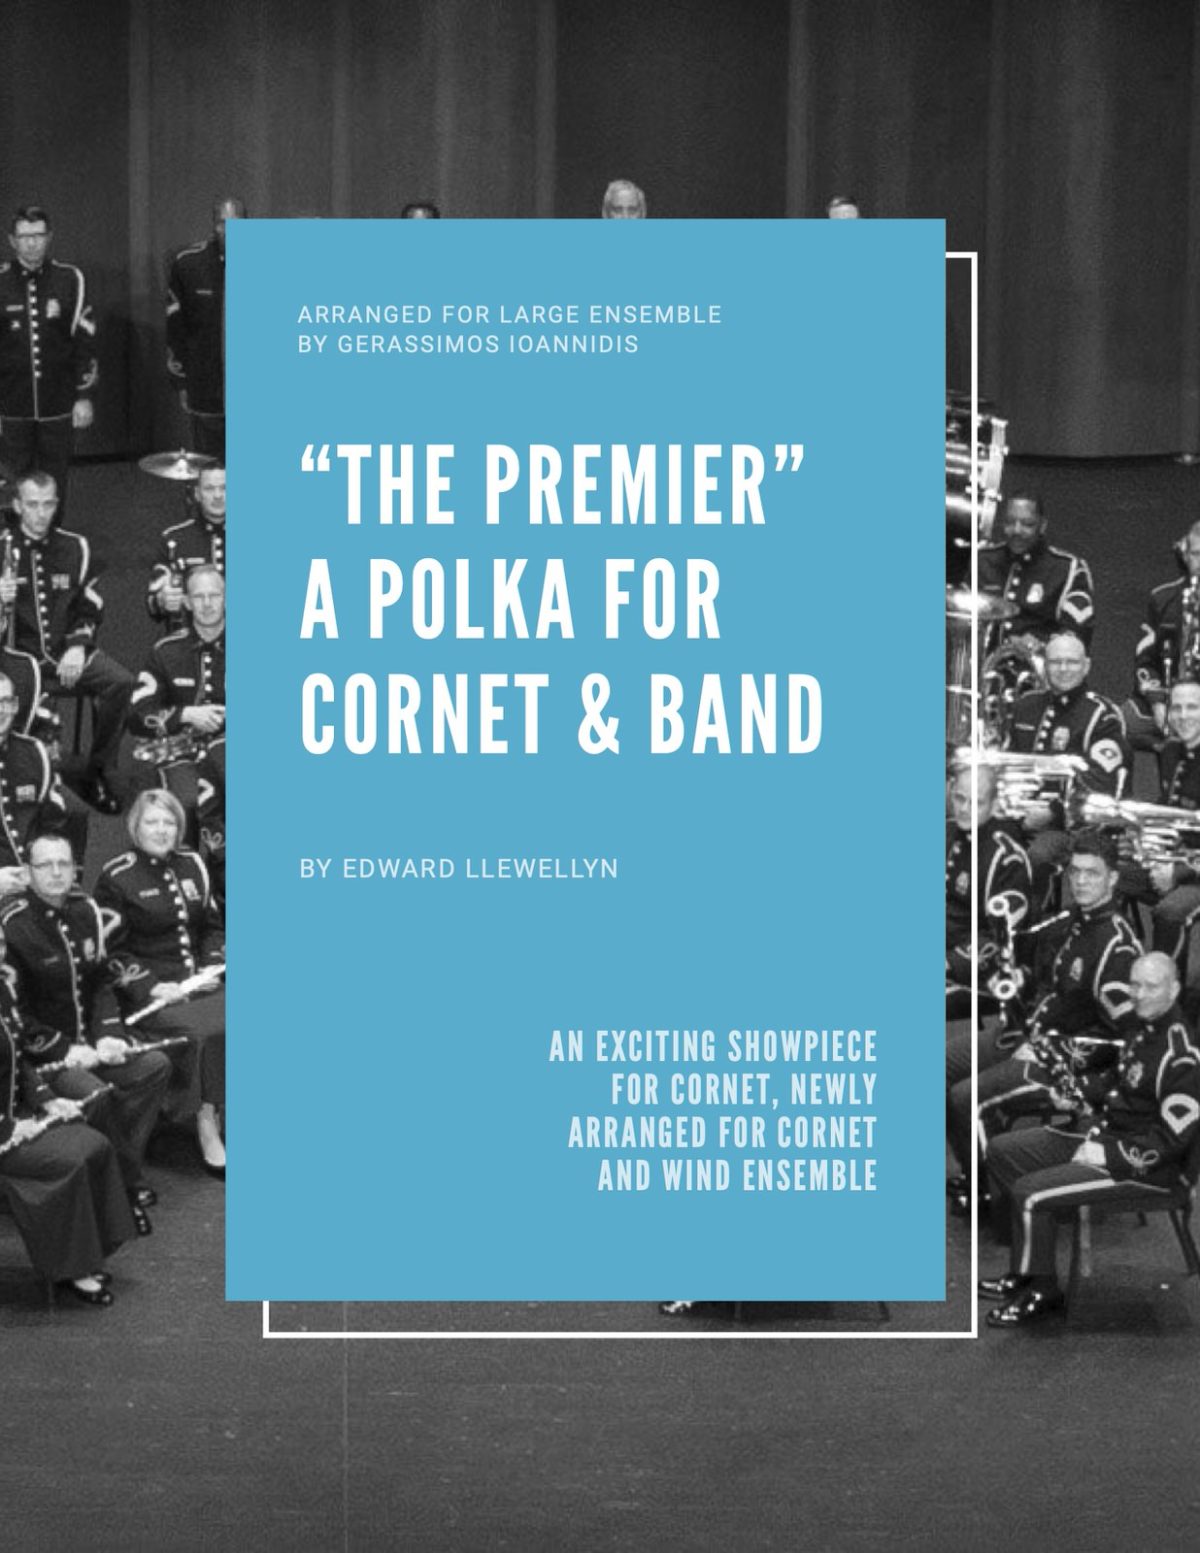 Llewellyn, The Premier for Cornet and Band-p01